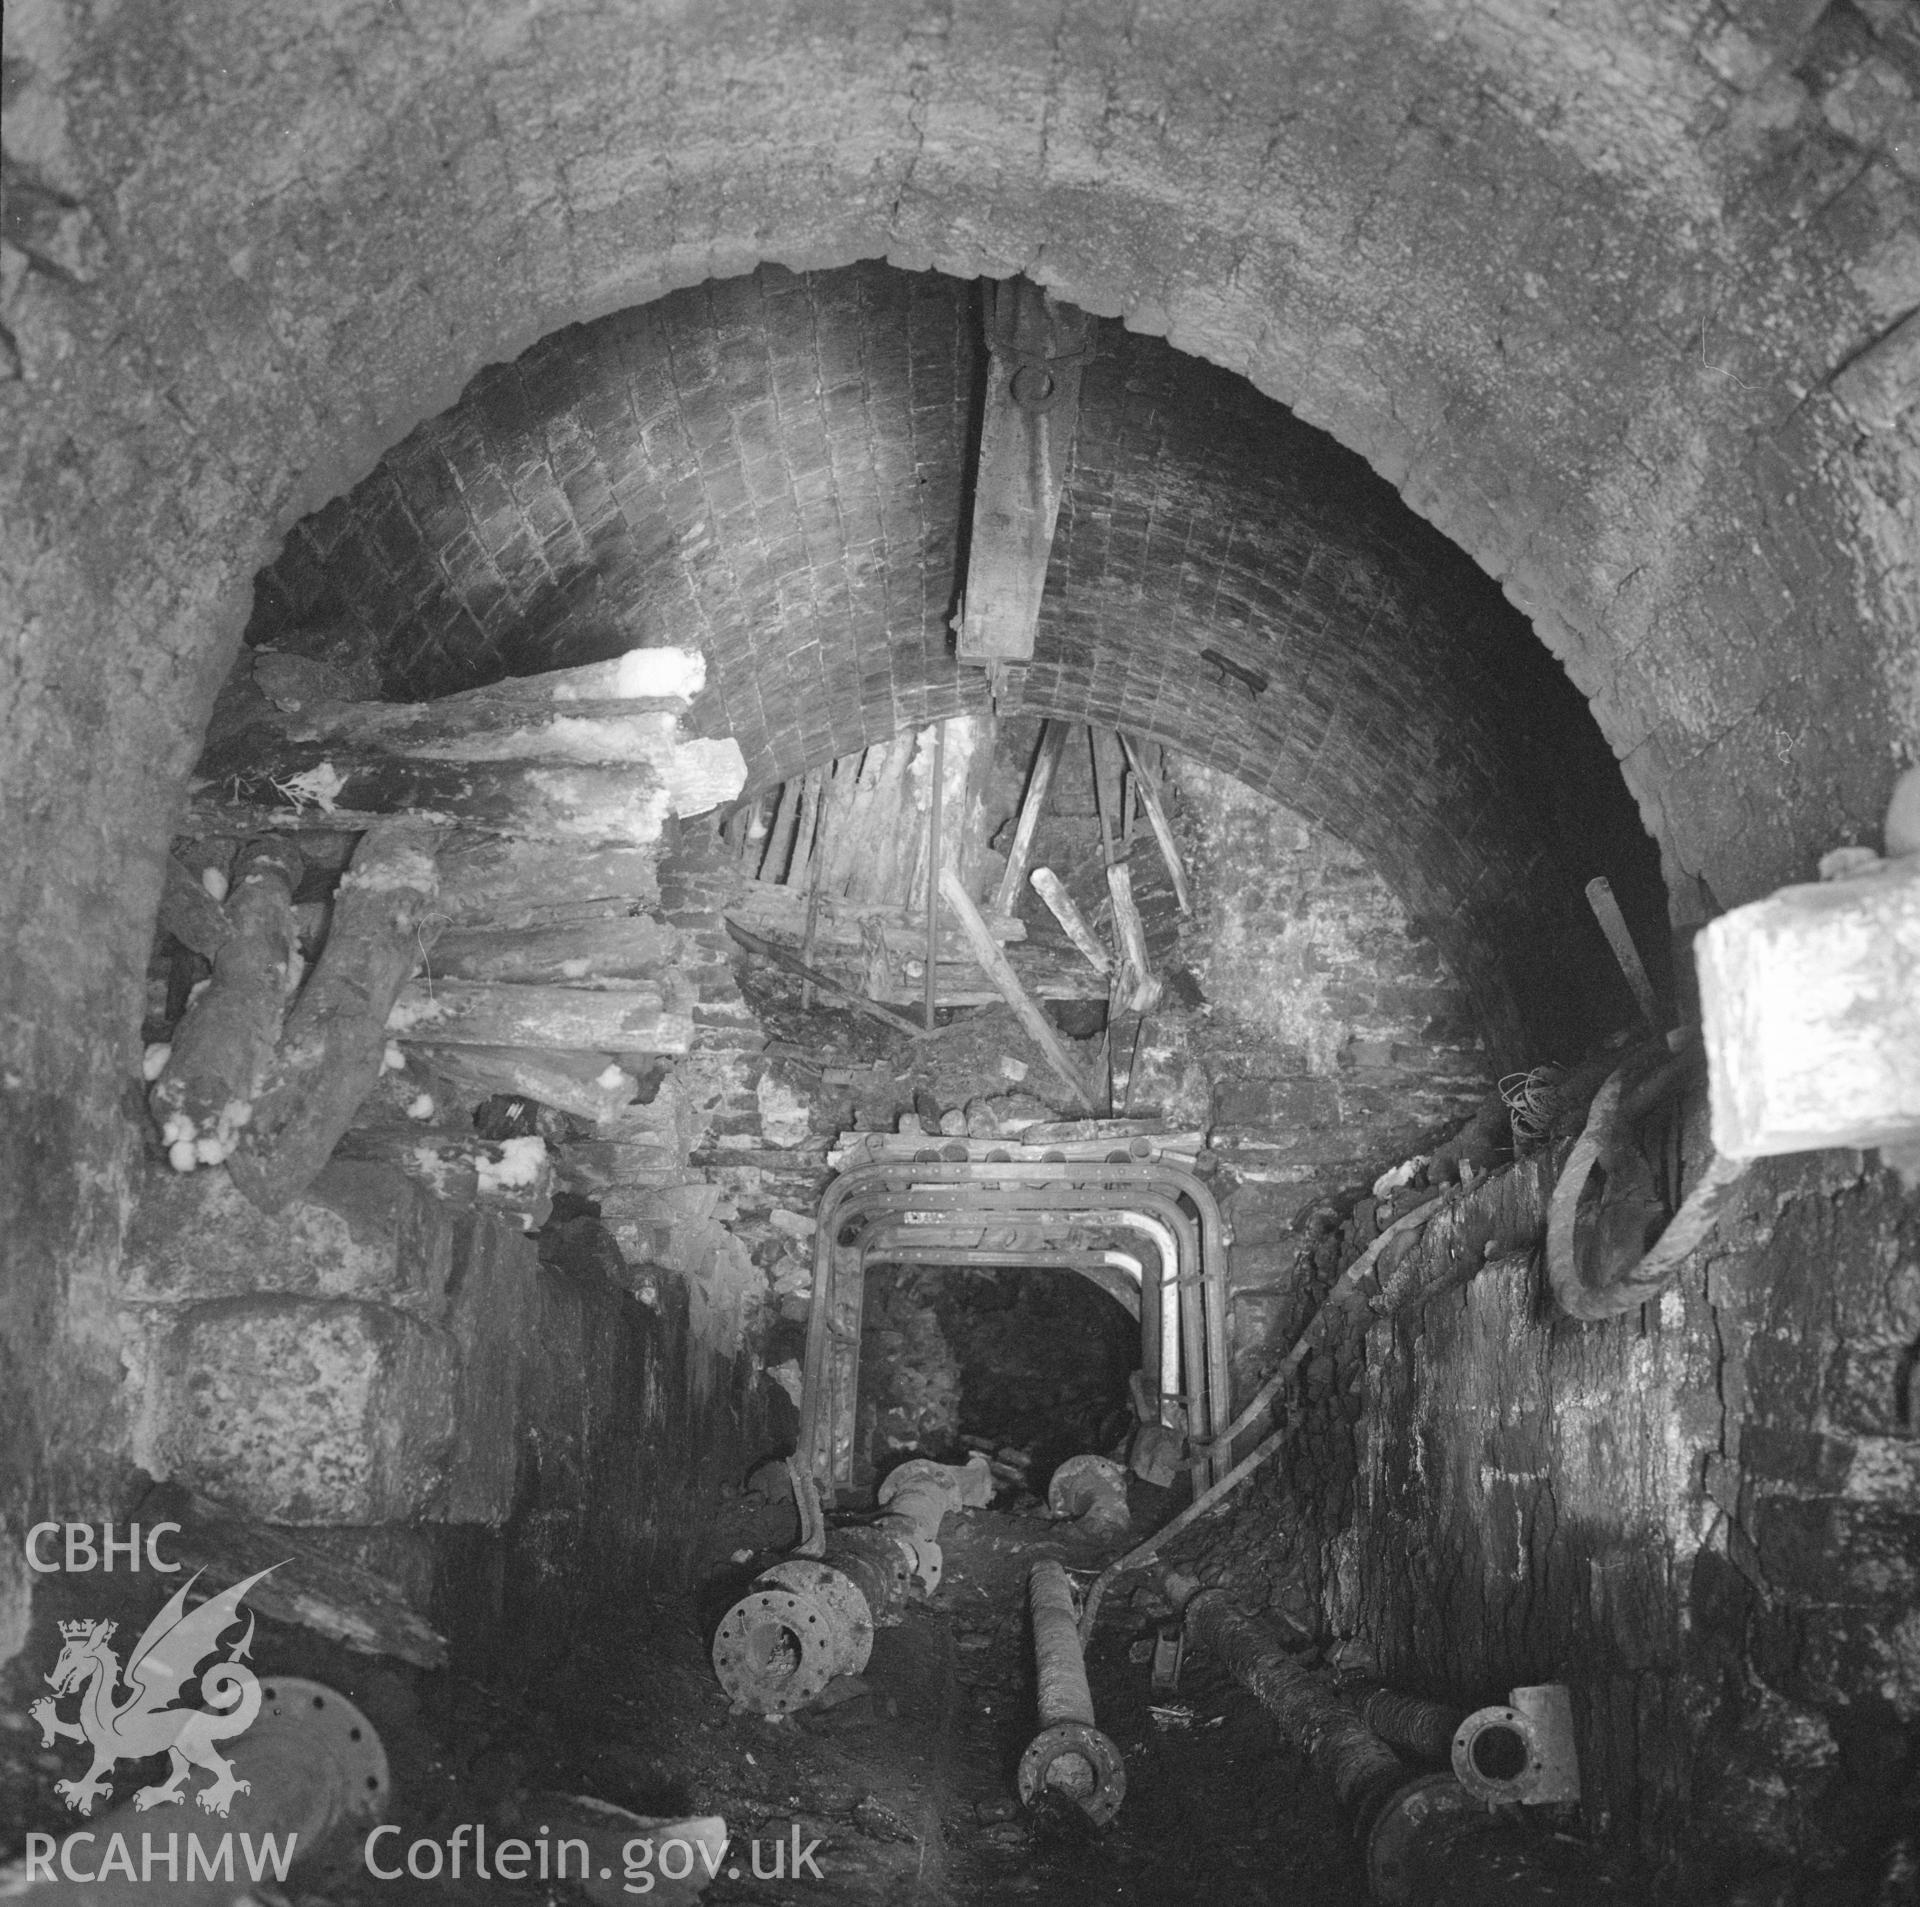 Digital copy of an acetate negative showing underground engine house at Big Pit, from the John Cornwell Collection.